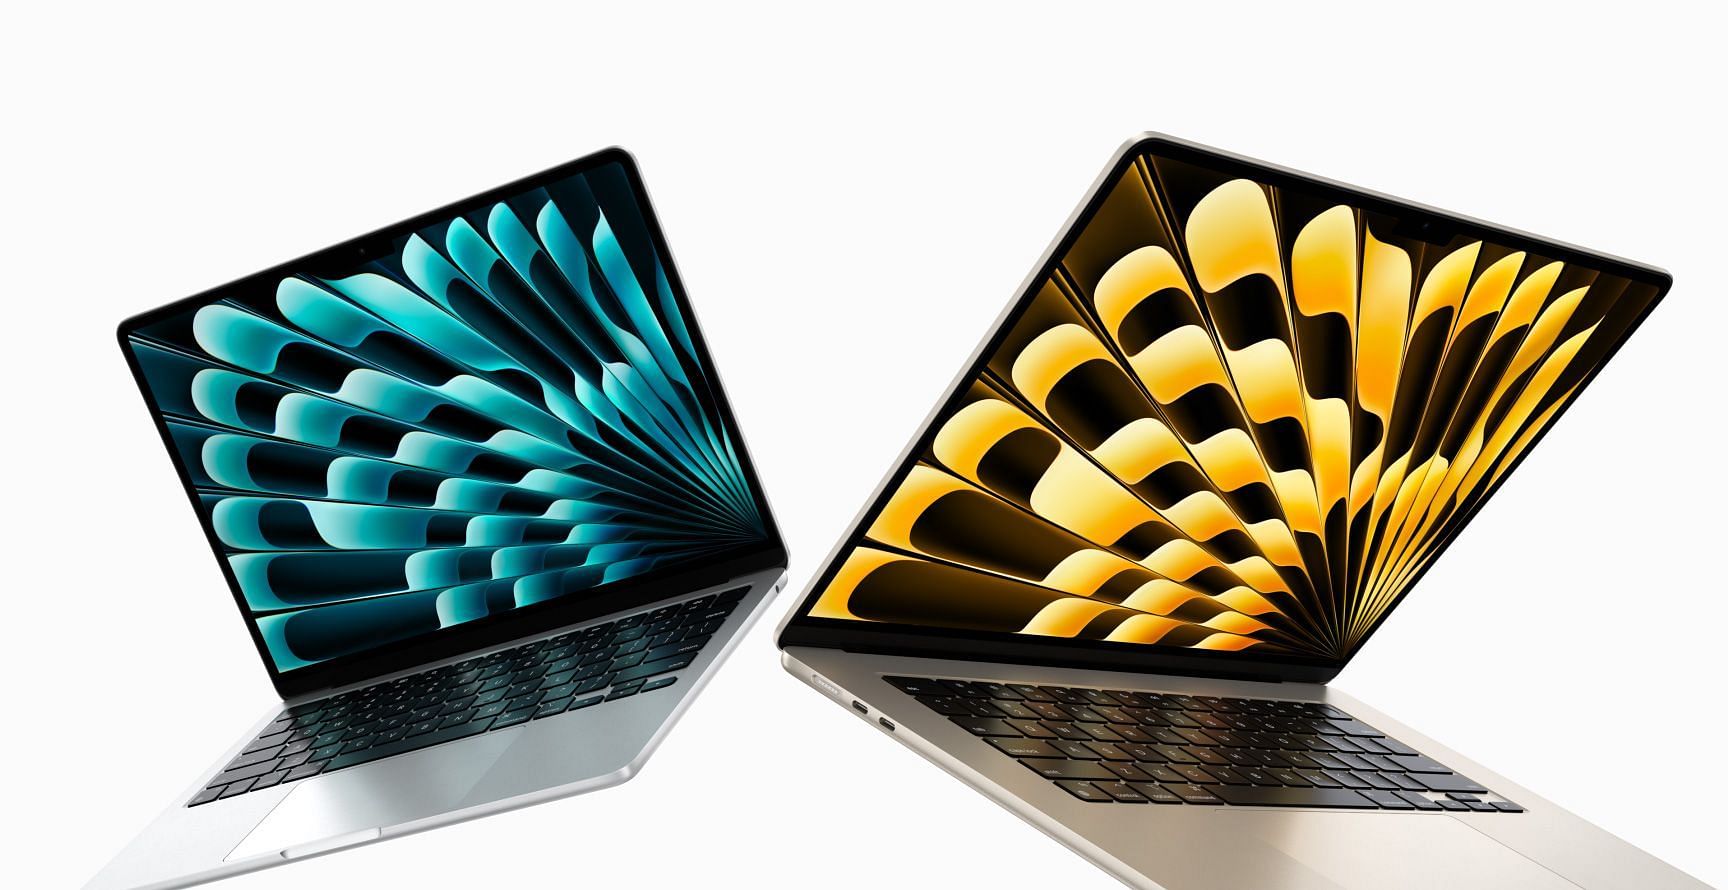 Both the notebooks come with similar displays (Image via Apple)